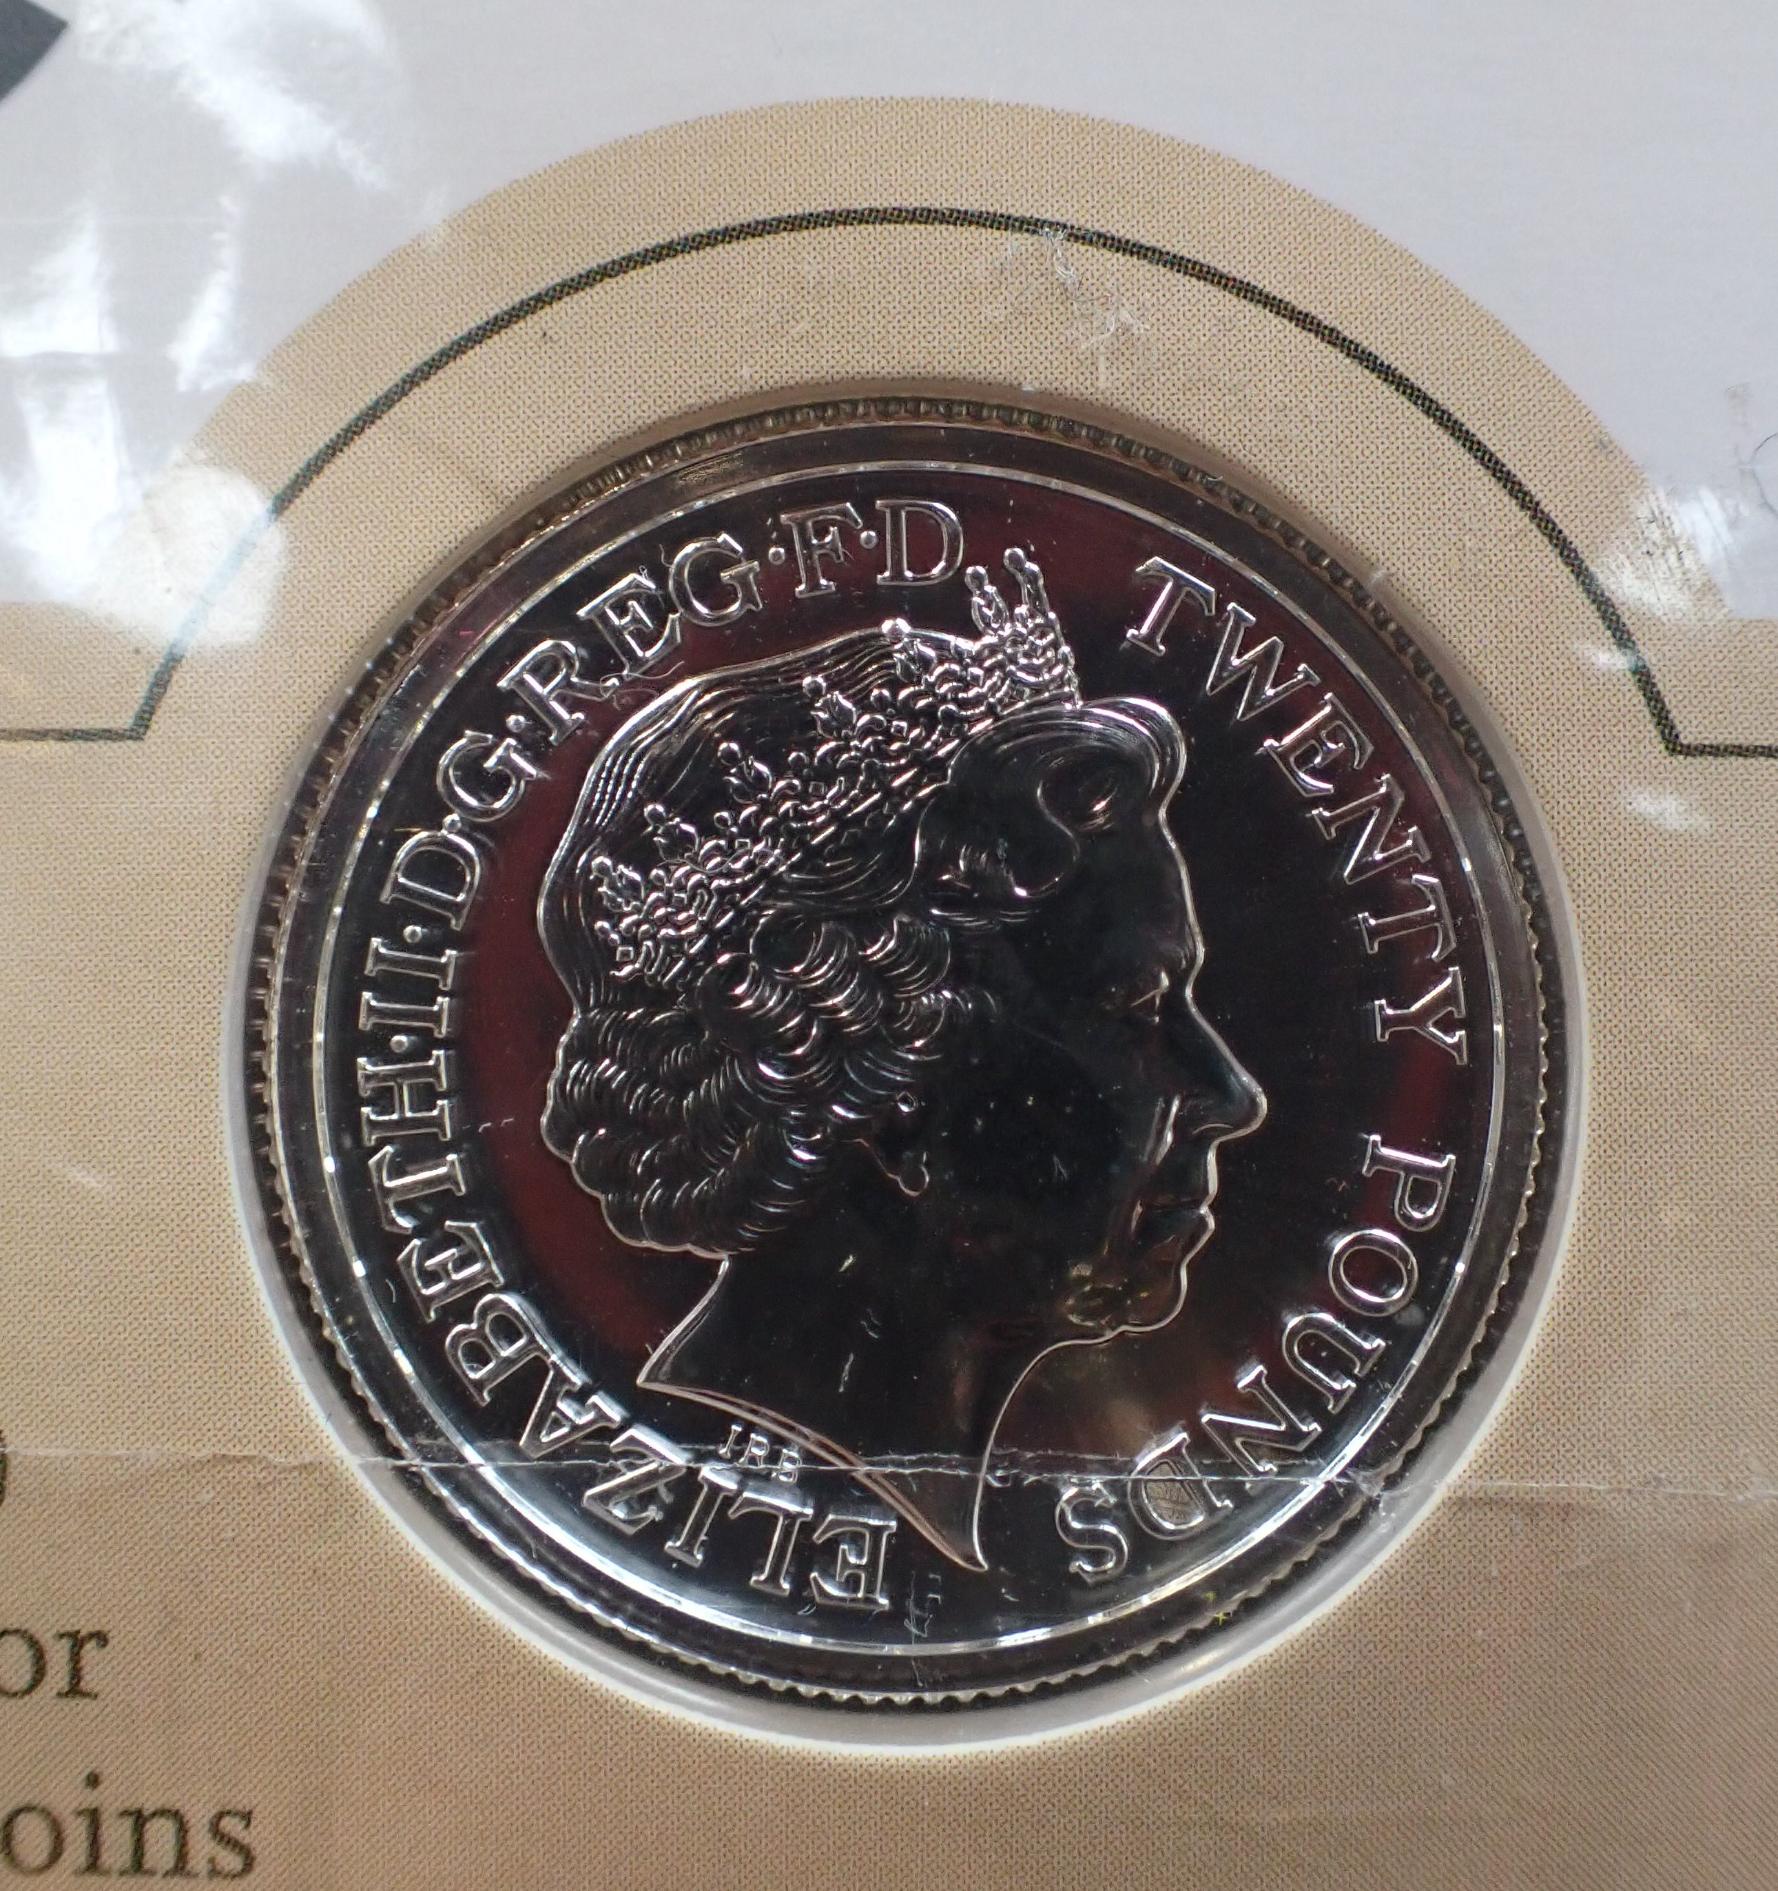 LONDON MINT OFFICE: A GOLD-PLATED SILVER ST. GEORGE AND DRAGON £5 COIN - Image 6 of 6